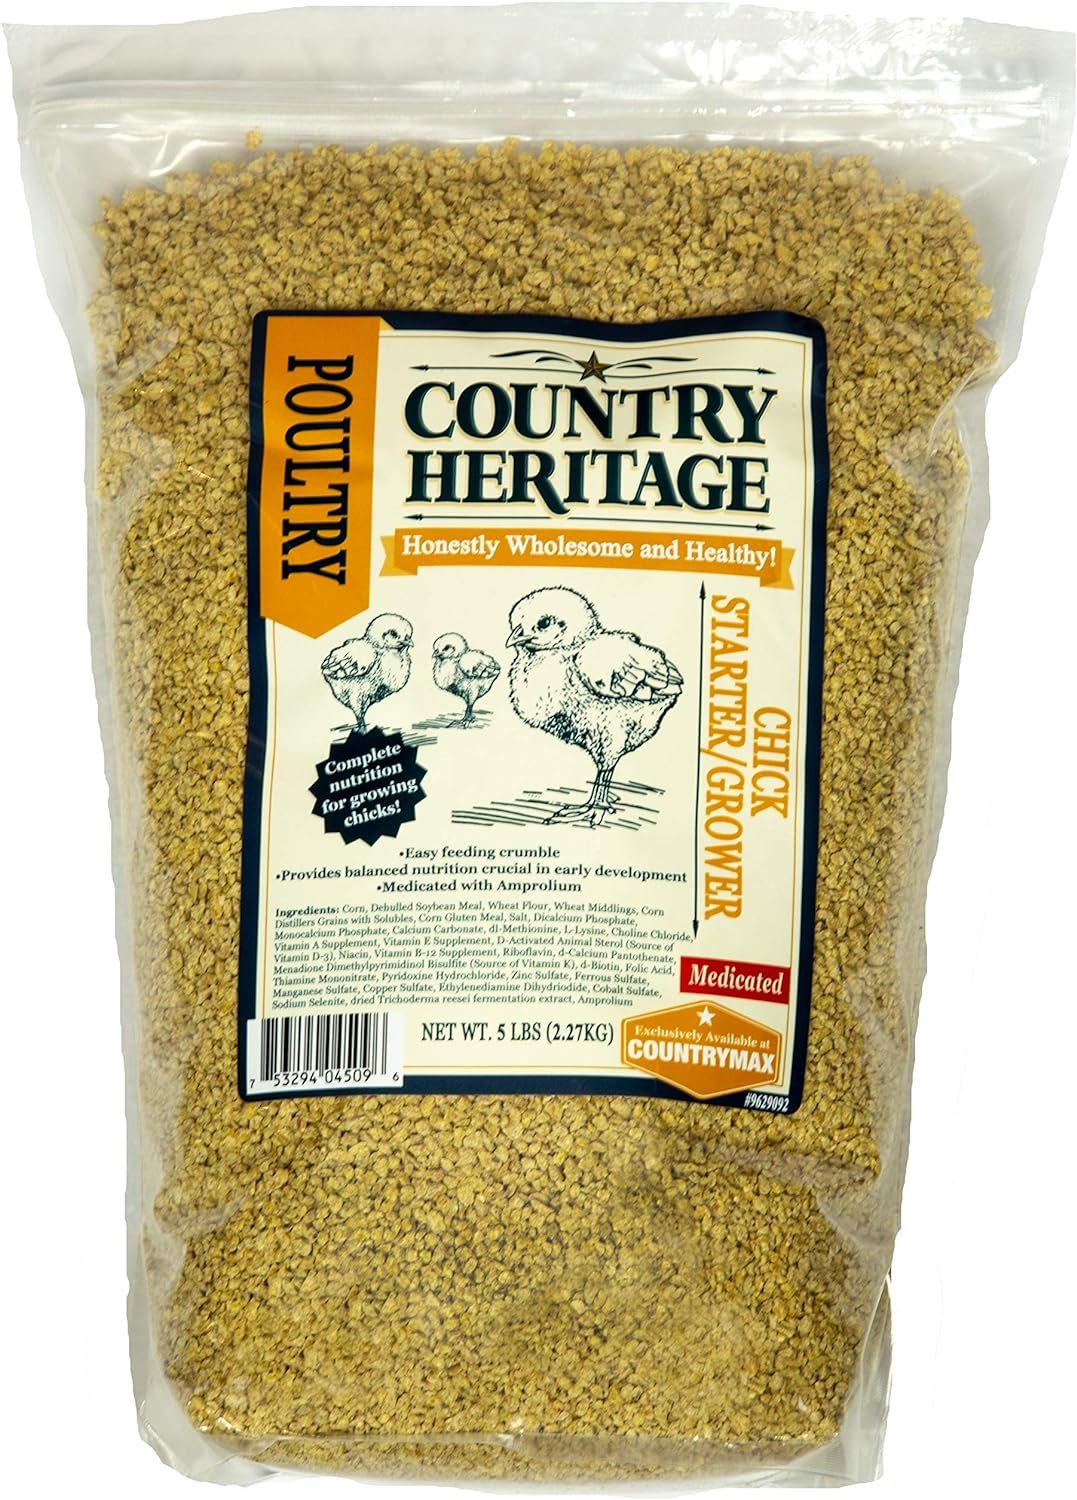 Country Heritage Medicated Baby Chick Food Starter Grower Crumbled Feed 5 Pounds